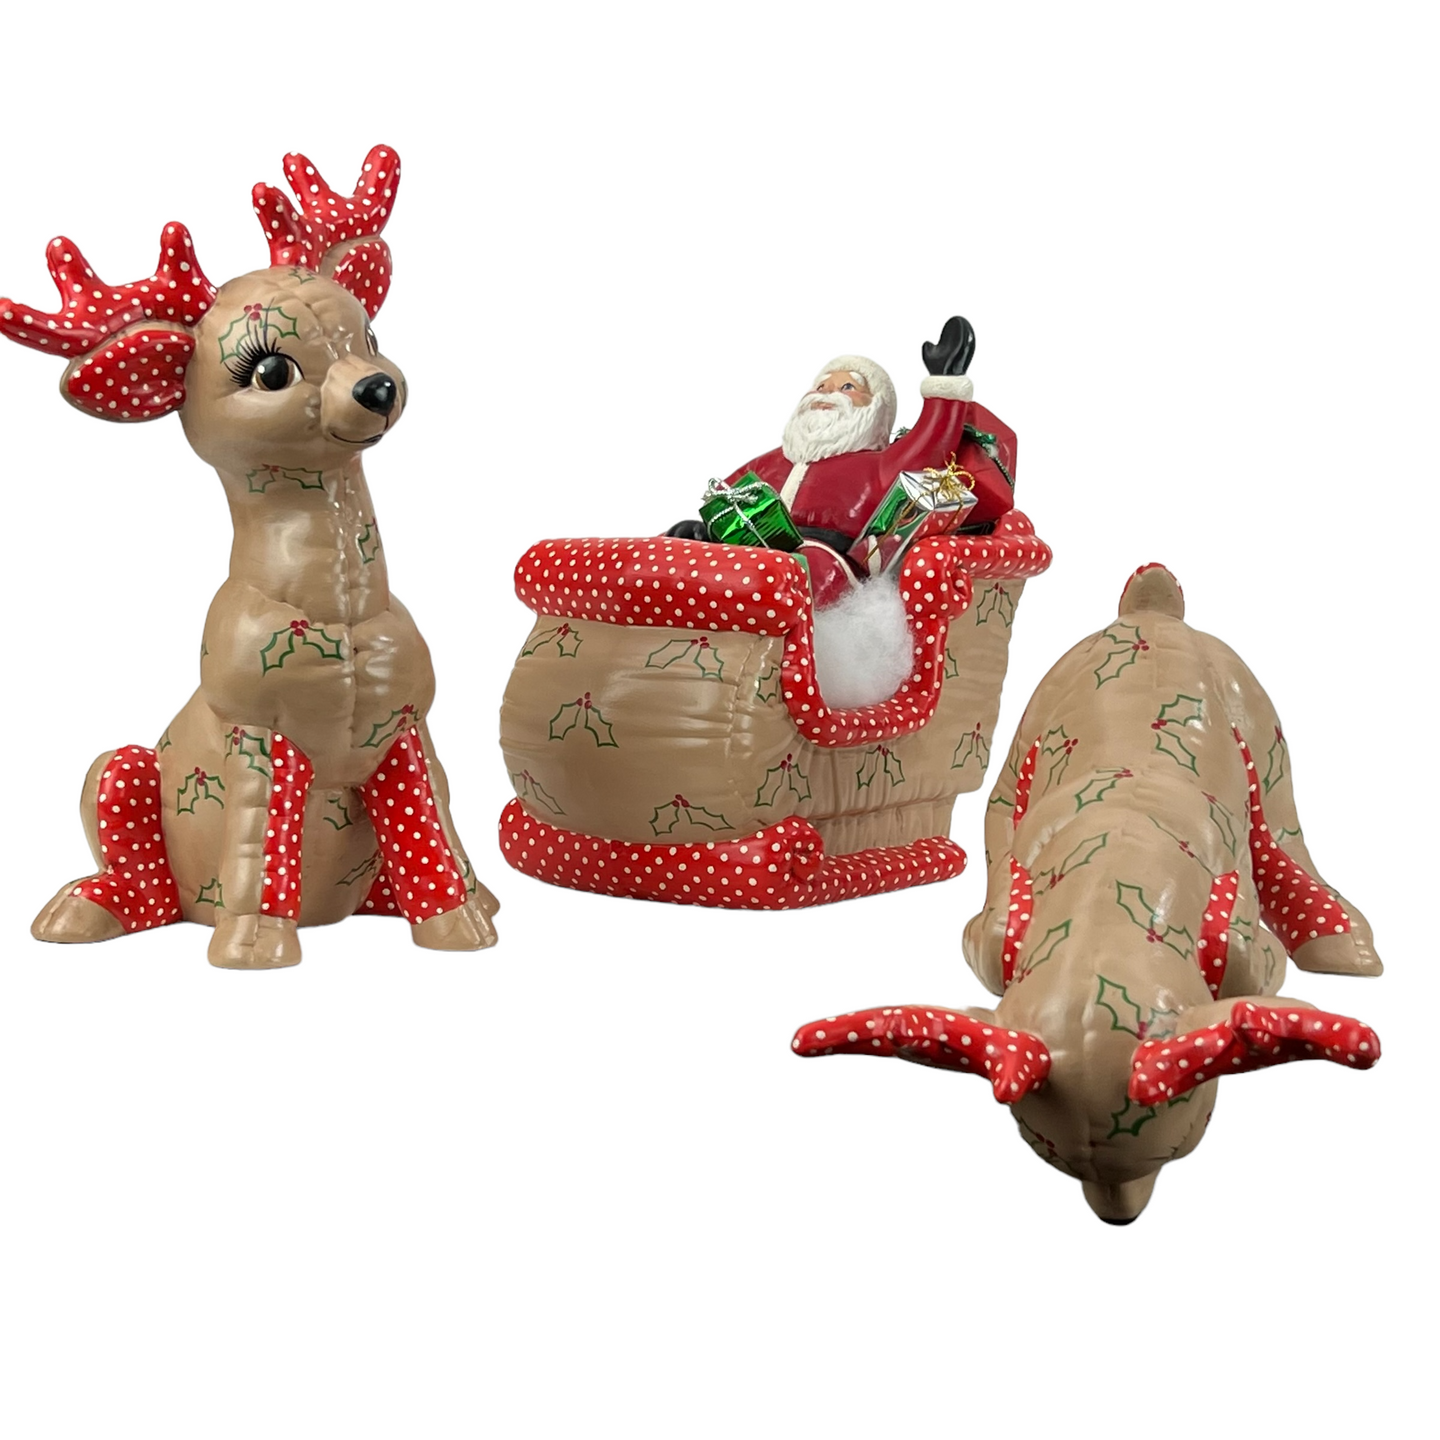 Kimple Christmas Hand-painted Santa Clause in Sleigh and Reindeer Set